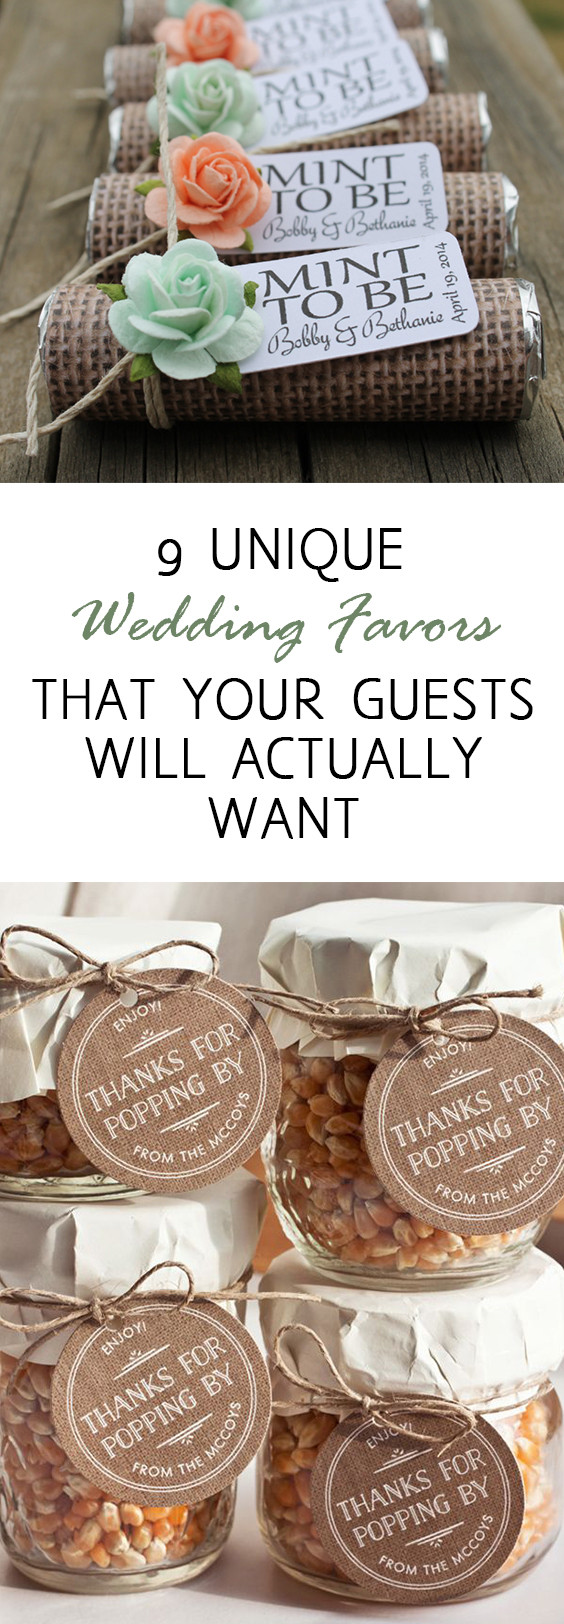 Affordable Wedding Favors
 9 Unique Wedding Favors that Your Guests Will Actually